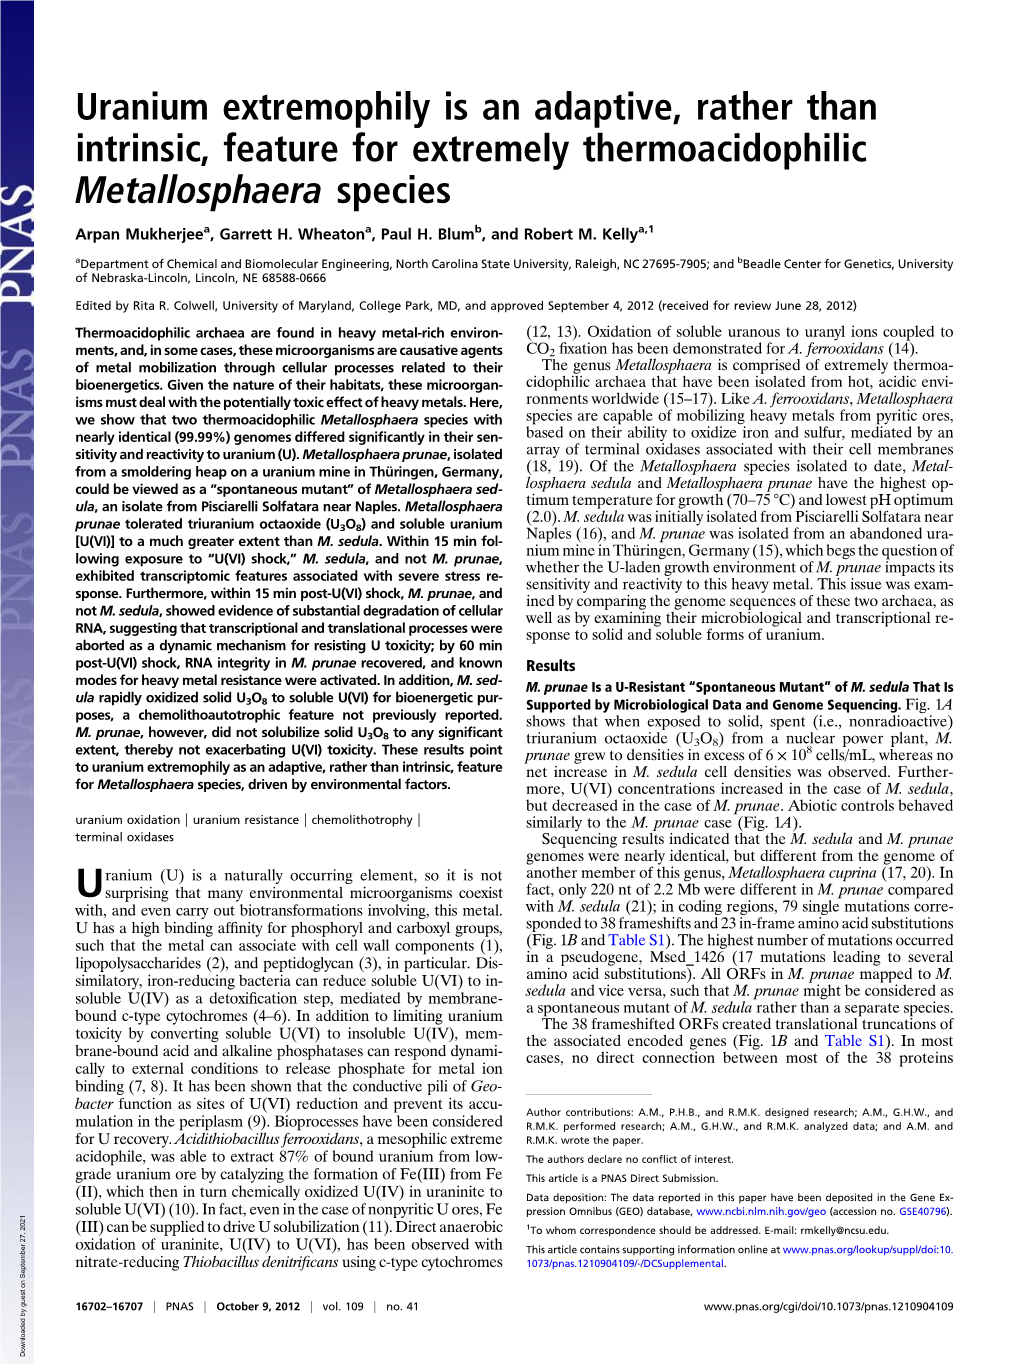 Uranium Extremophily Is an Adaptive, Rather Than Intrinsic, Feature for Extremely Thermoacidophilic Metallosphaera Species